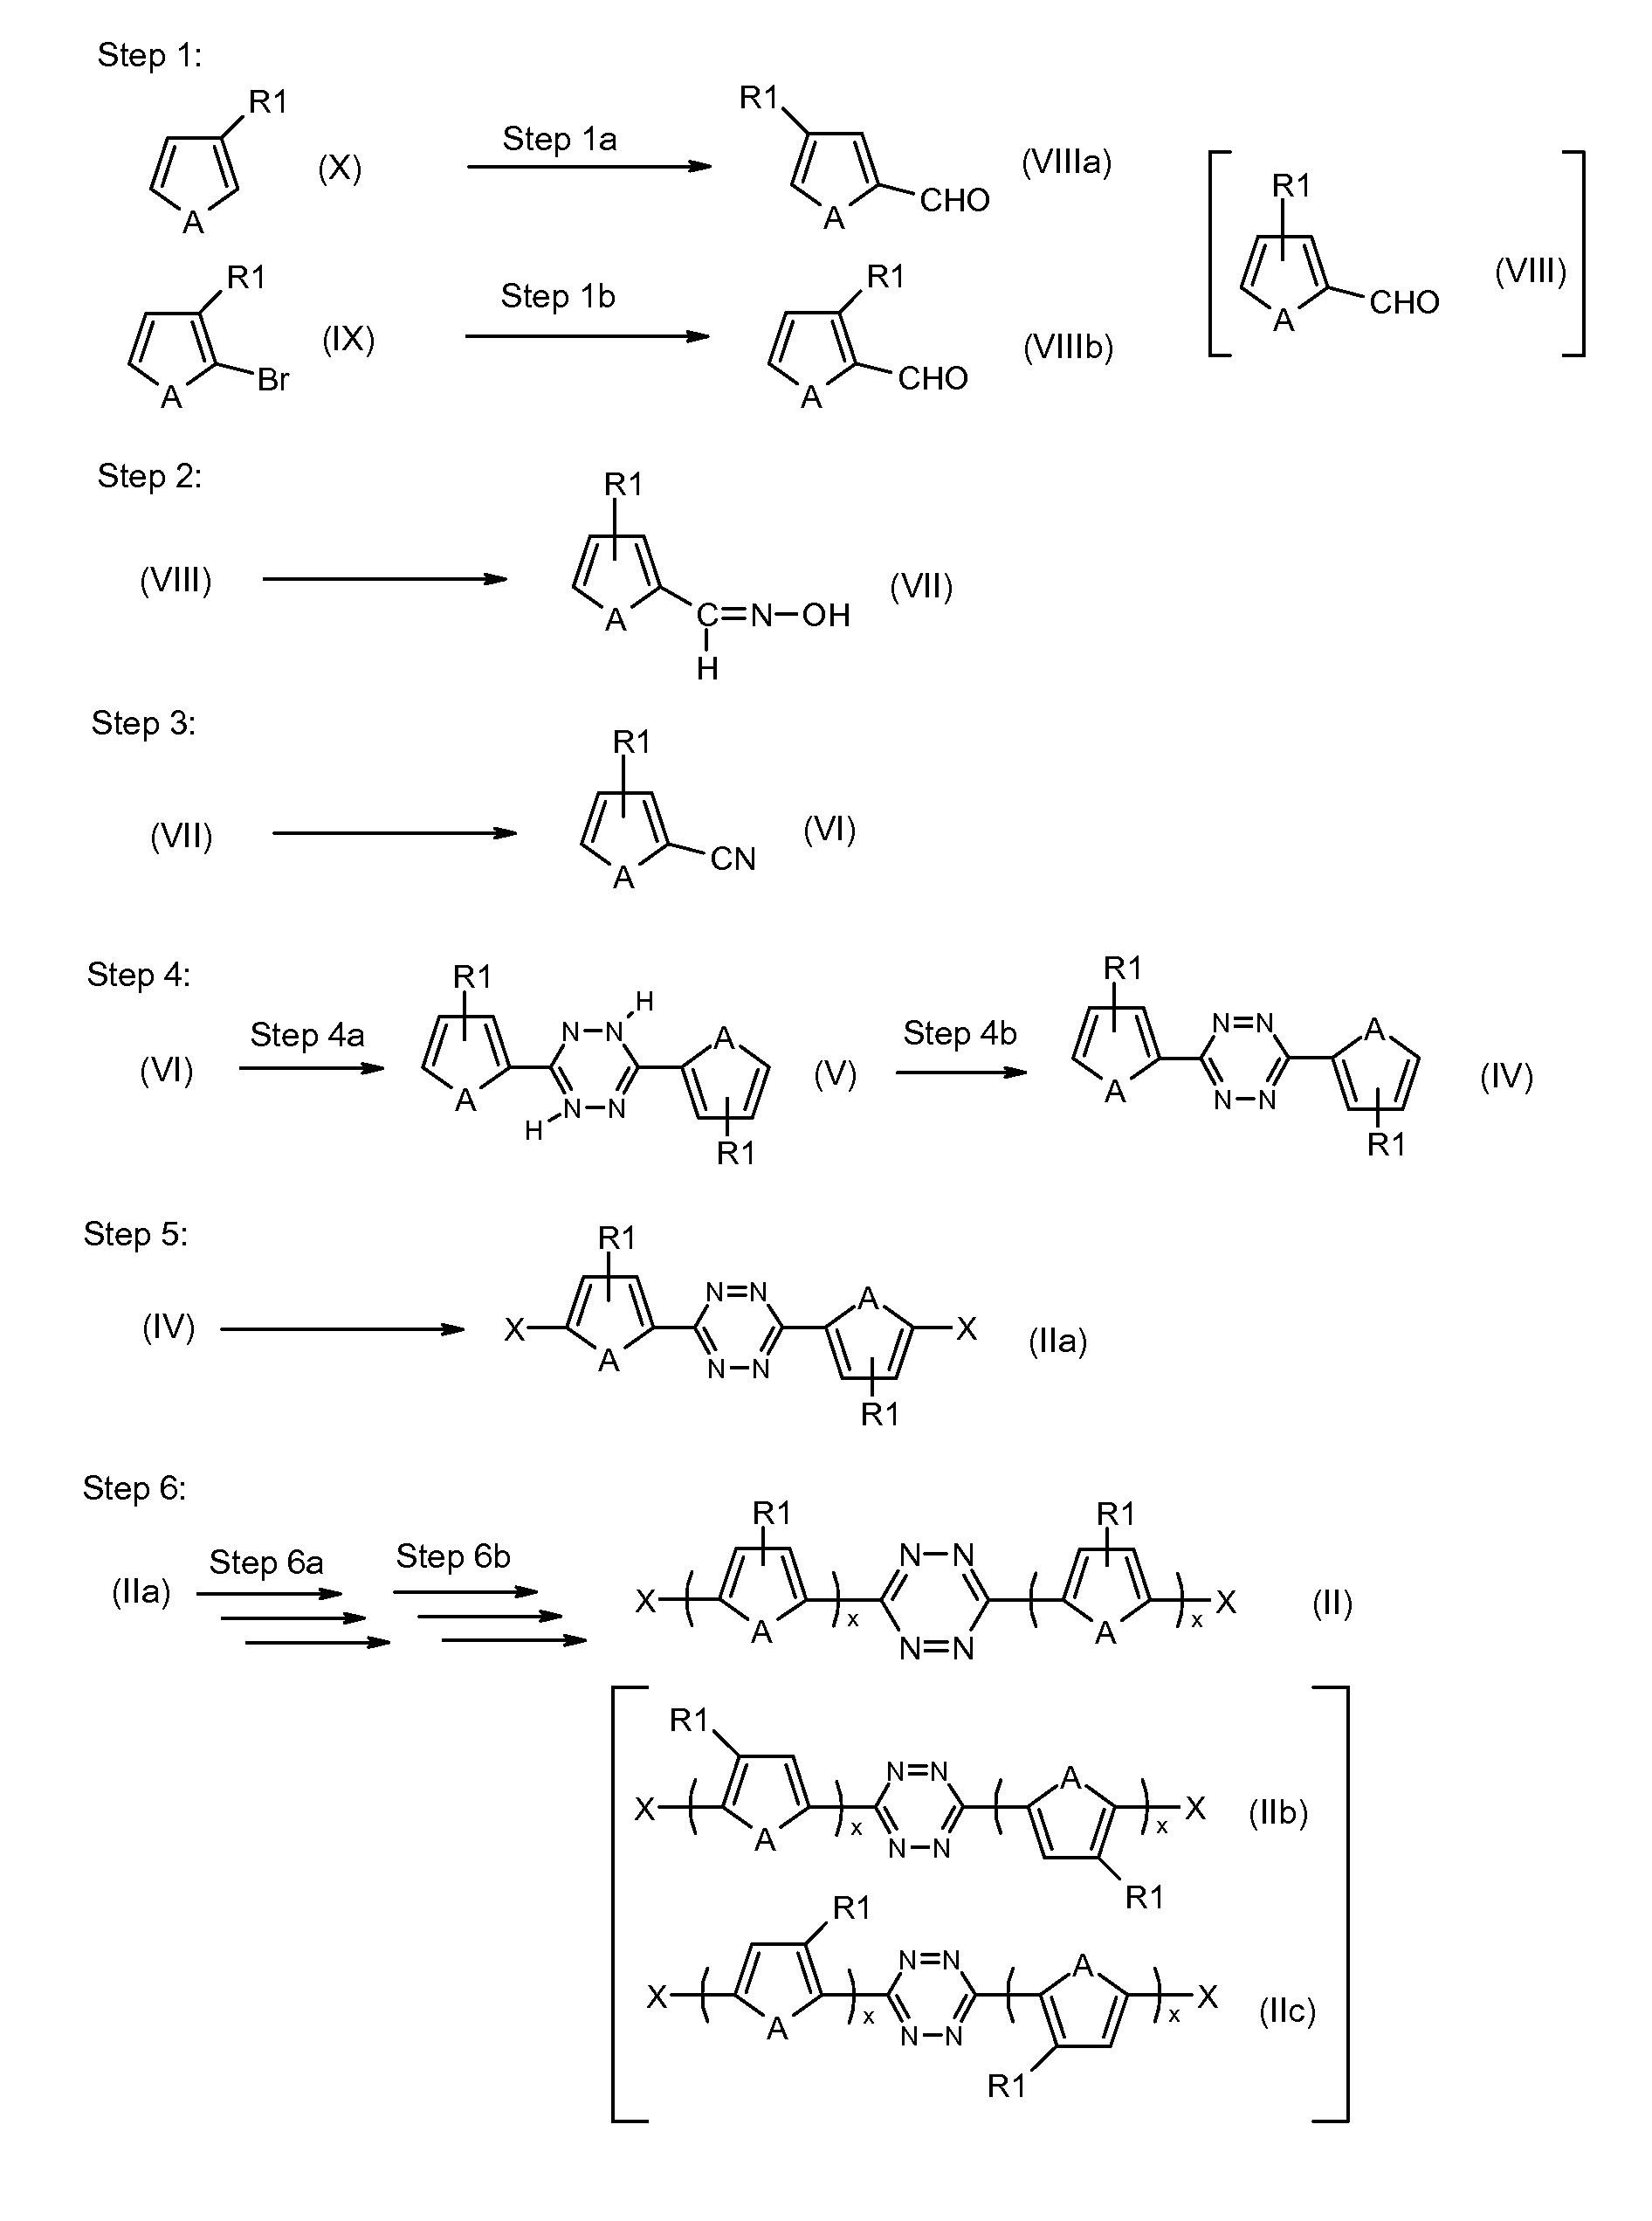 Tetrazine monomers and copolymers for use in organic electronic devices